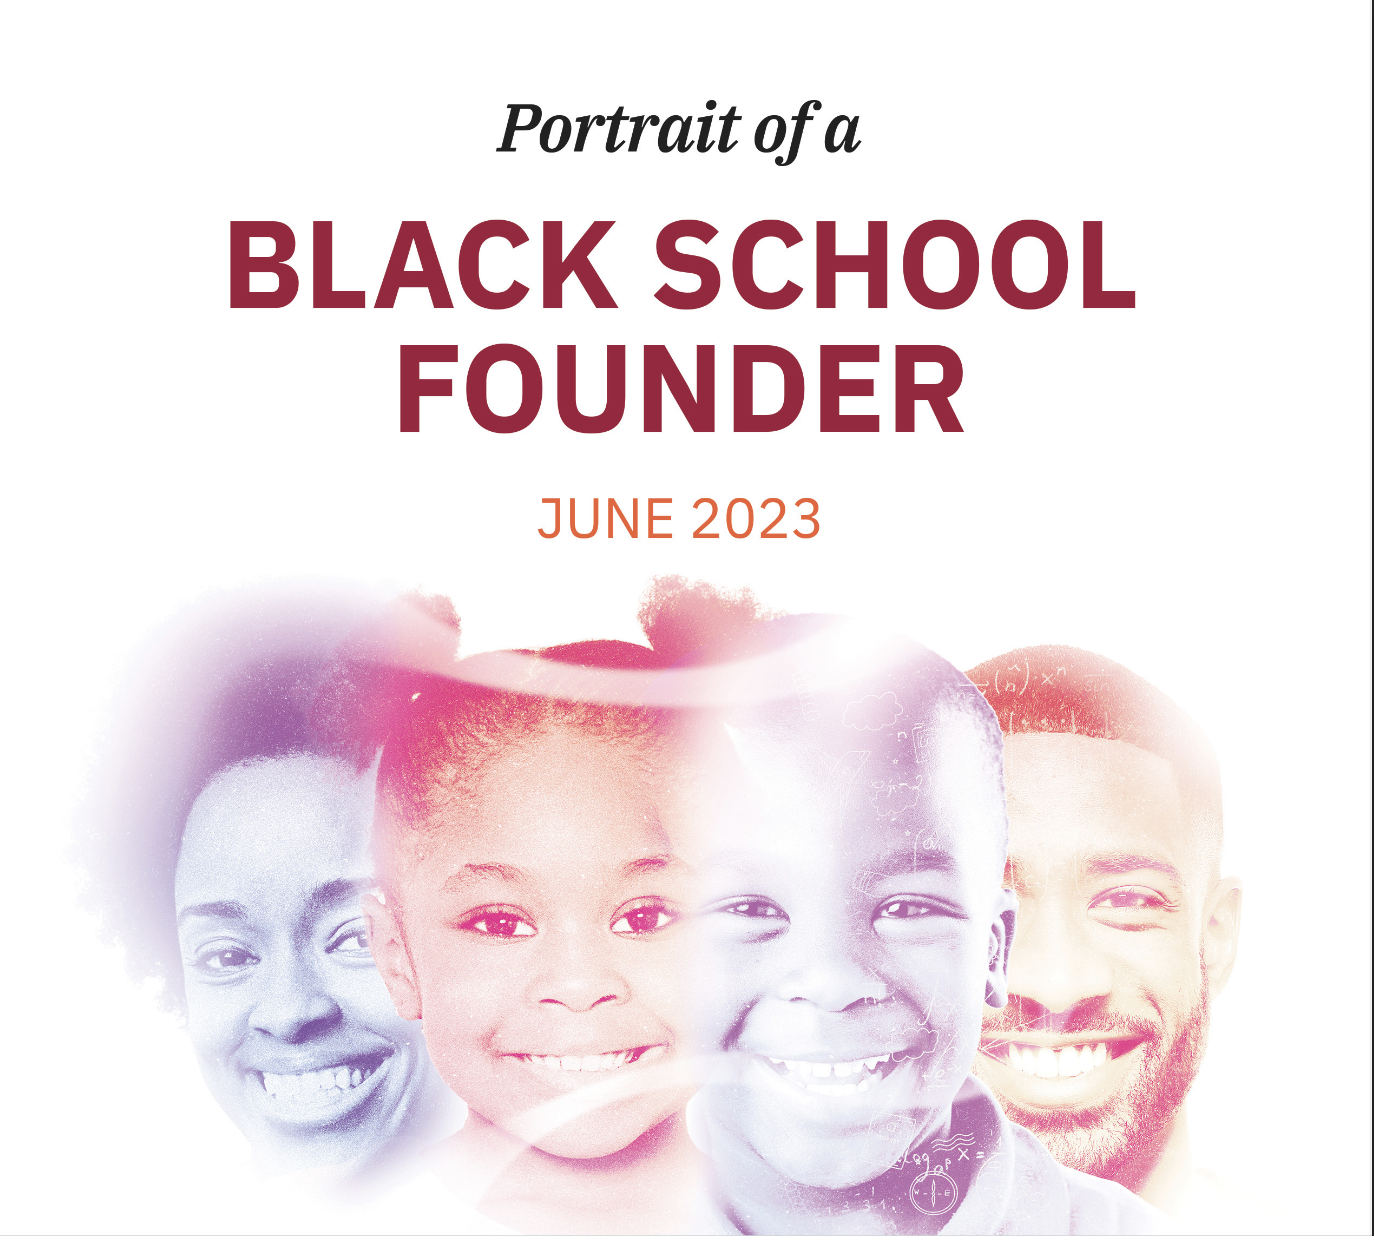 Special report: Insights from first-ever survey of Black educational entrepreneurs